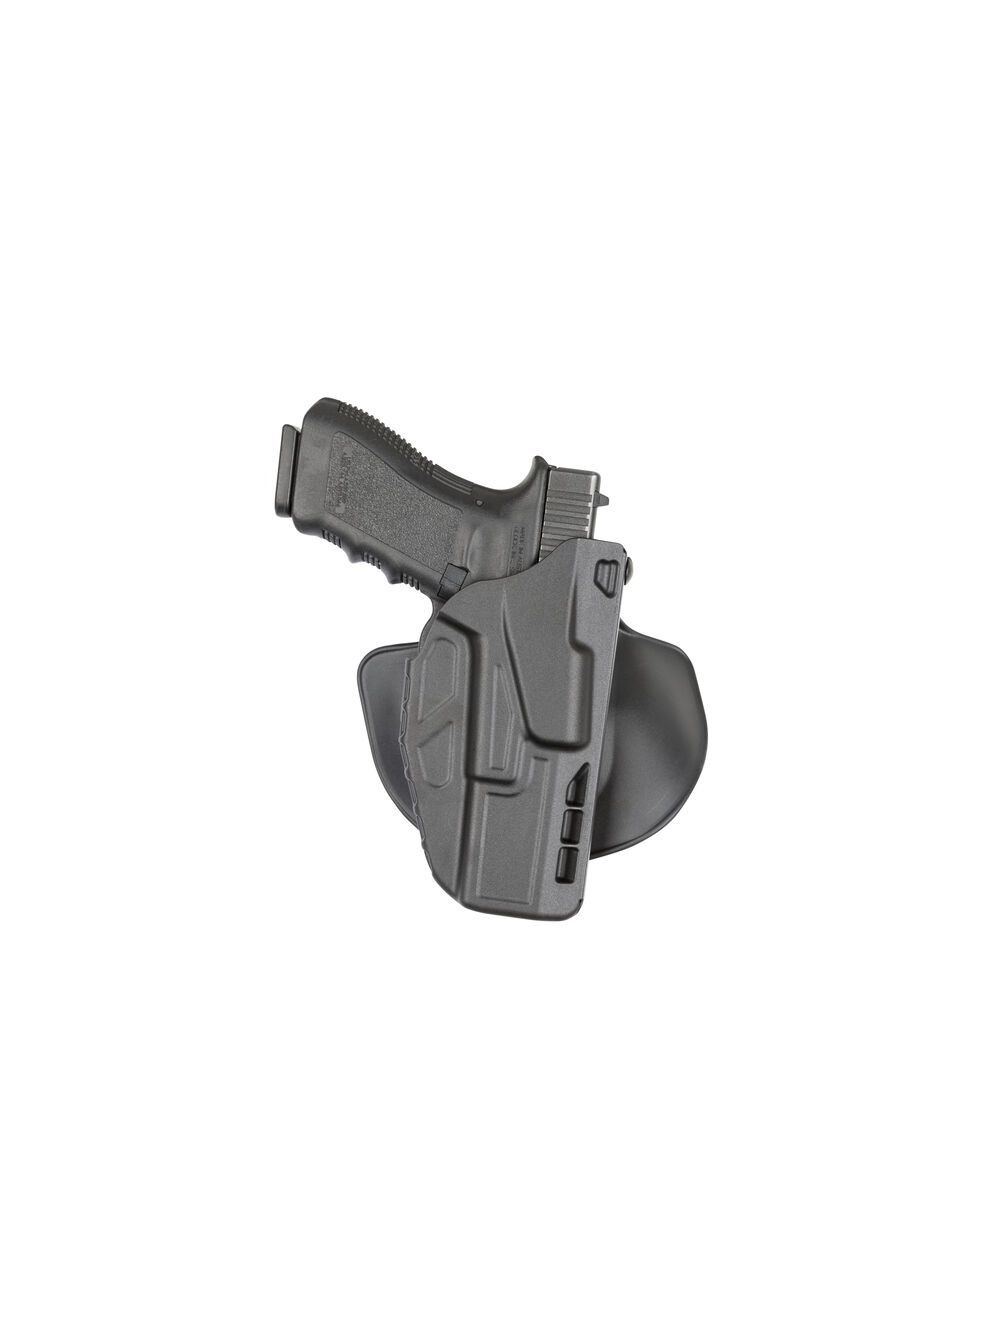 Model 7378 7TS ALS Concealment Paddle and Belt Loop Combo Holster for Glock 17